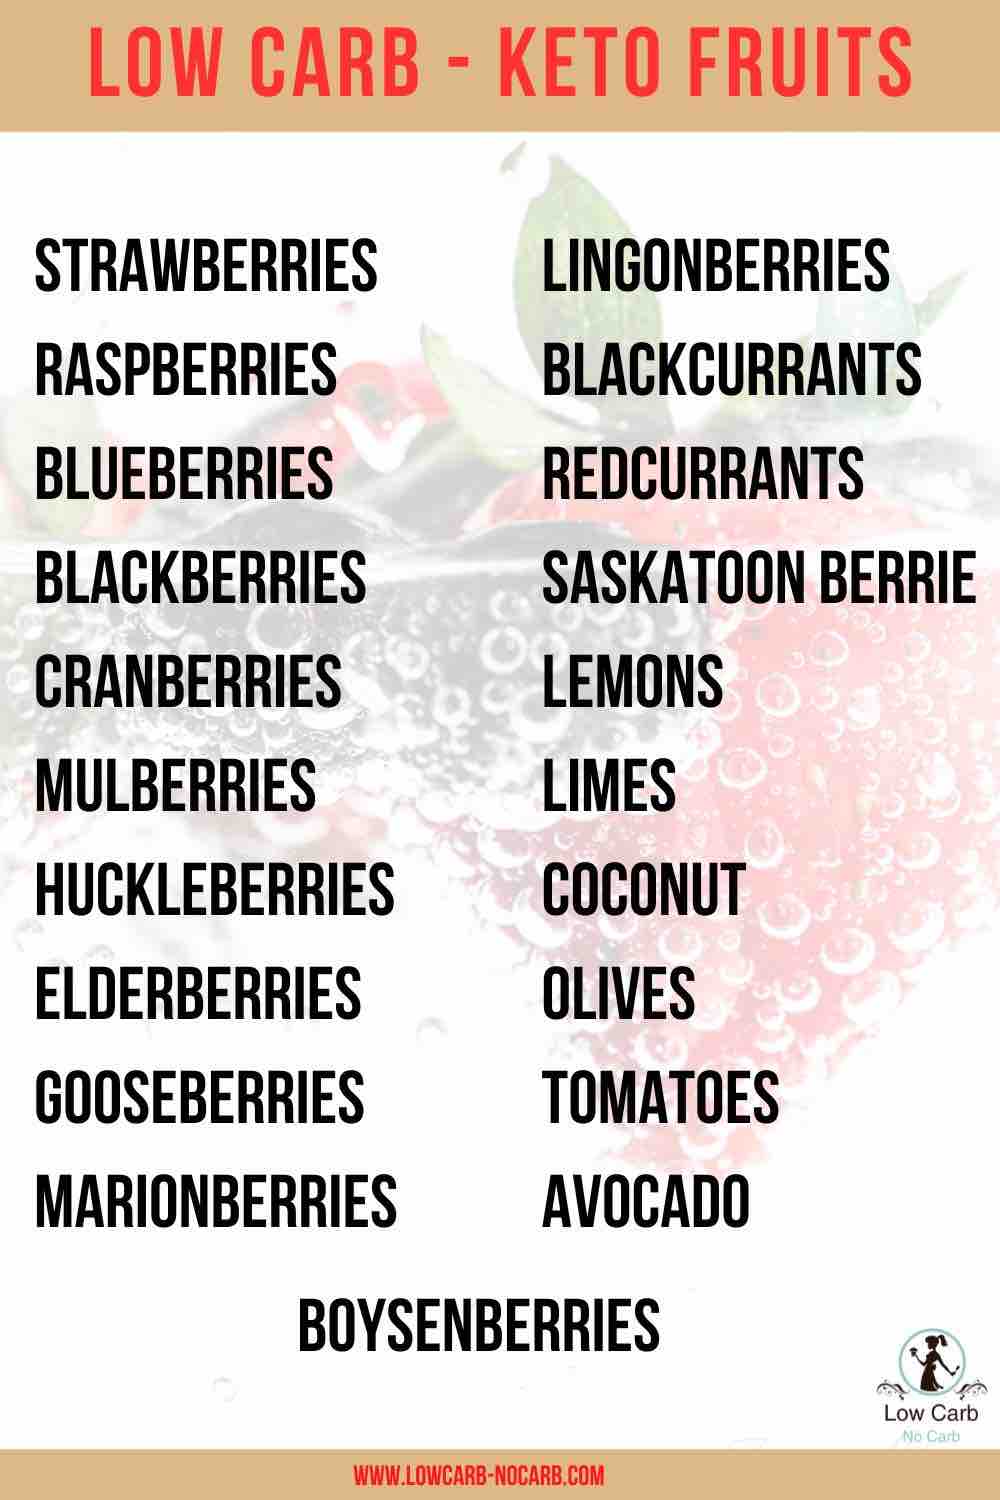 Low Carb Fruits poster.